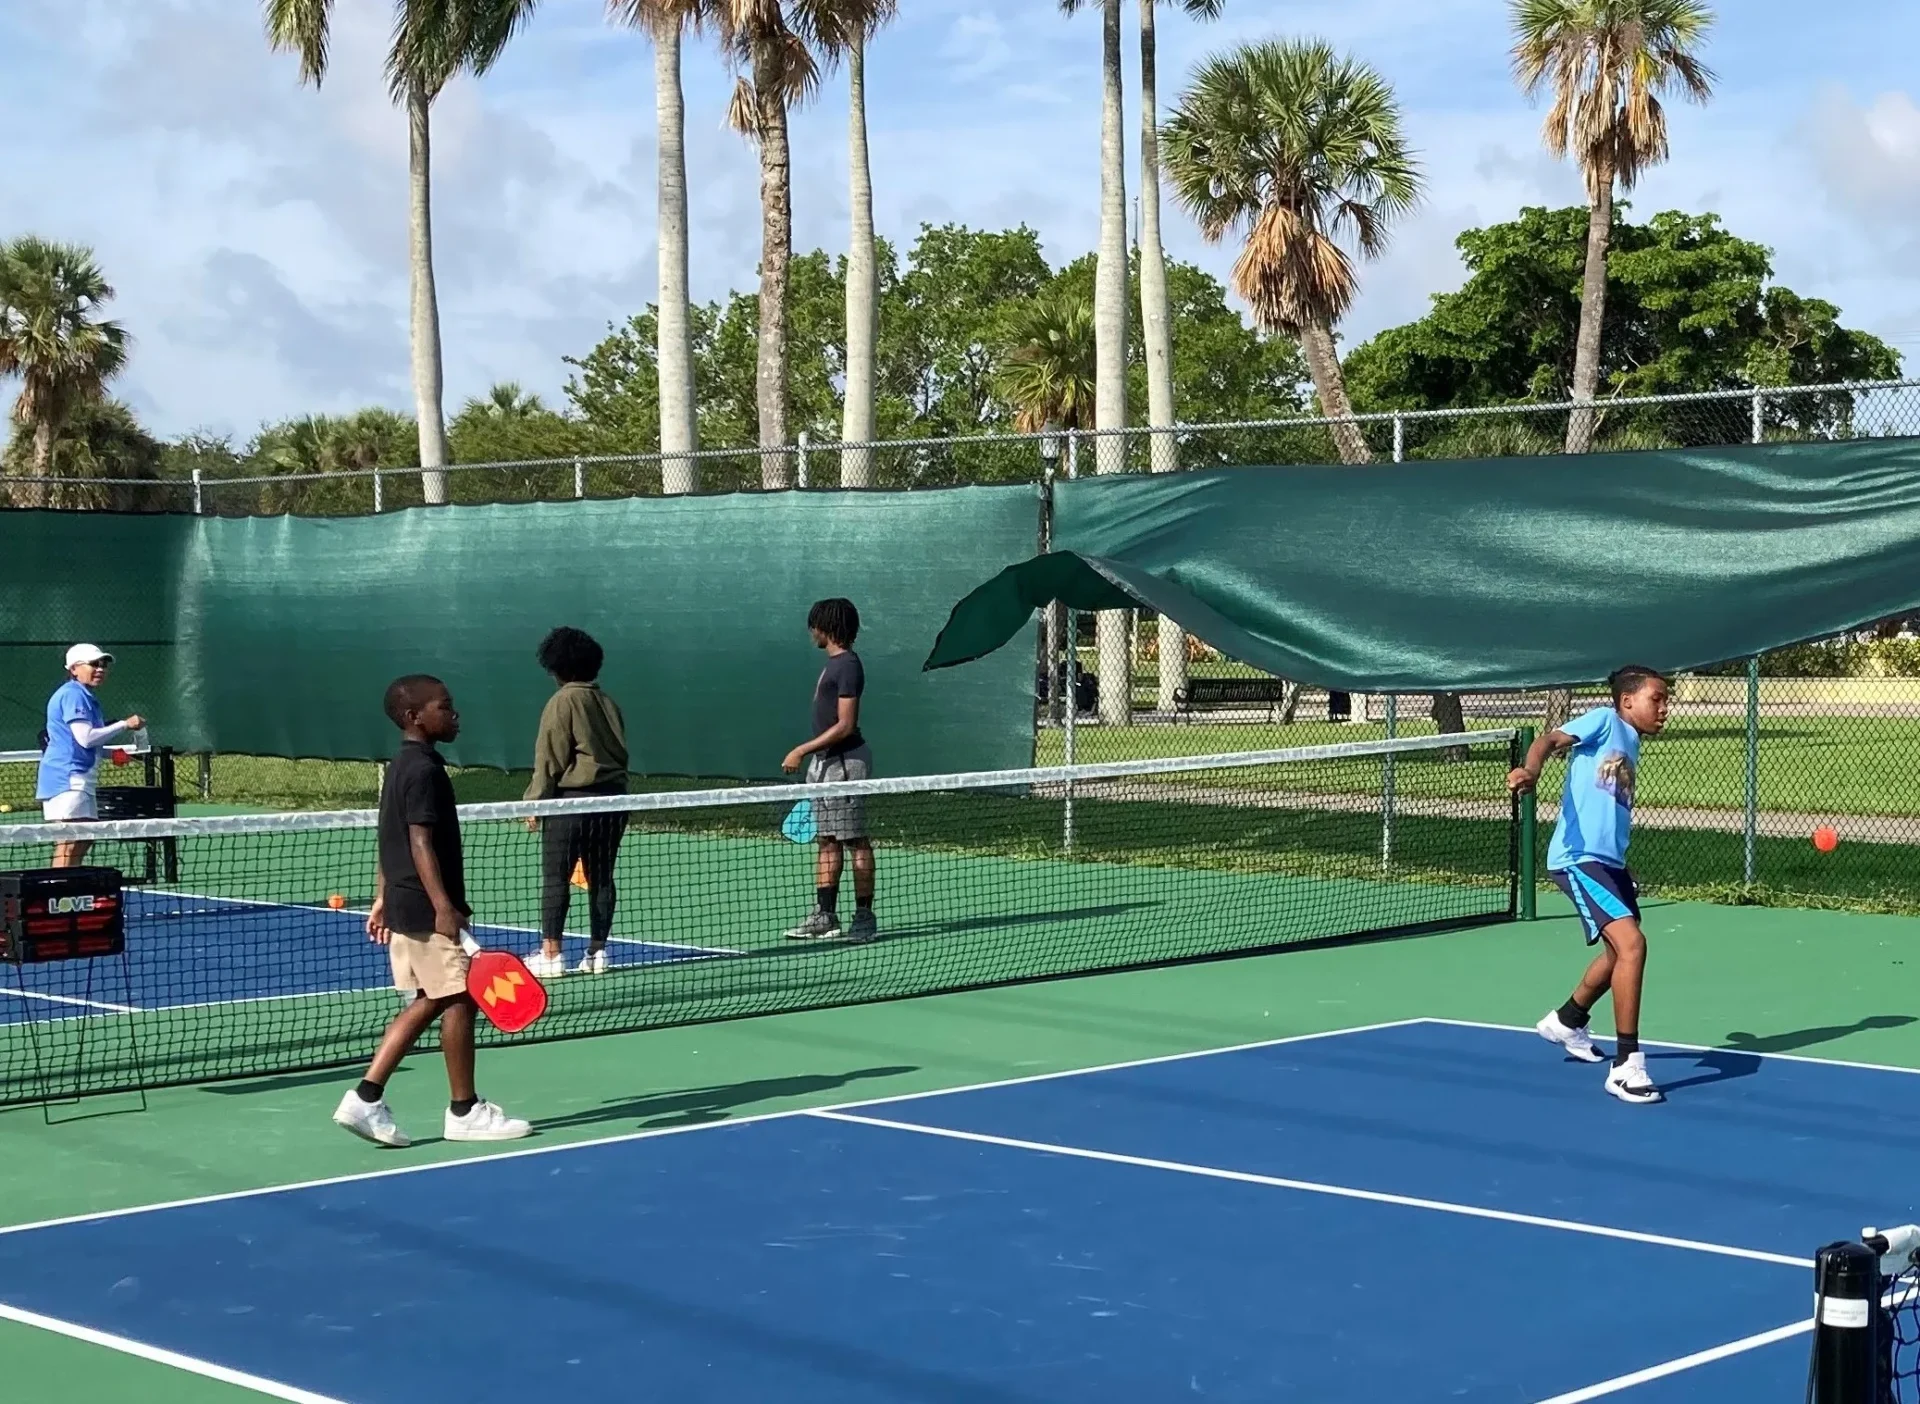 A group of young people playing tennis on a court.